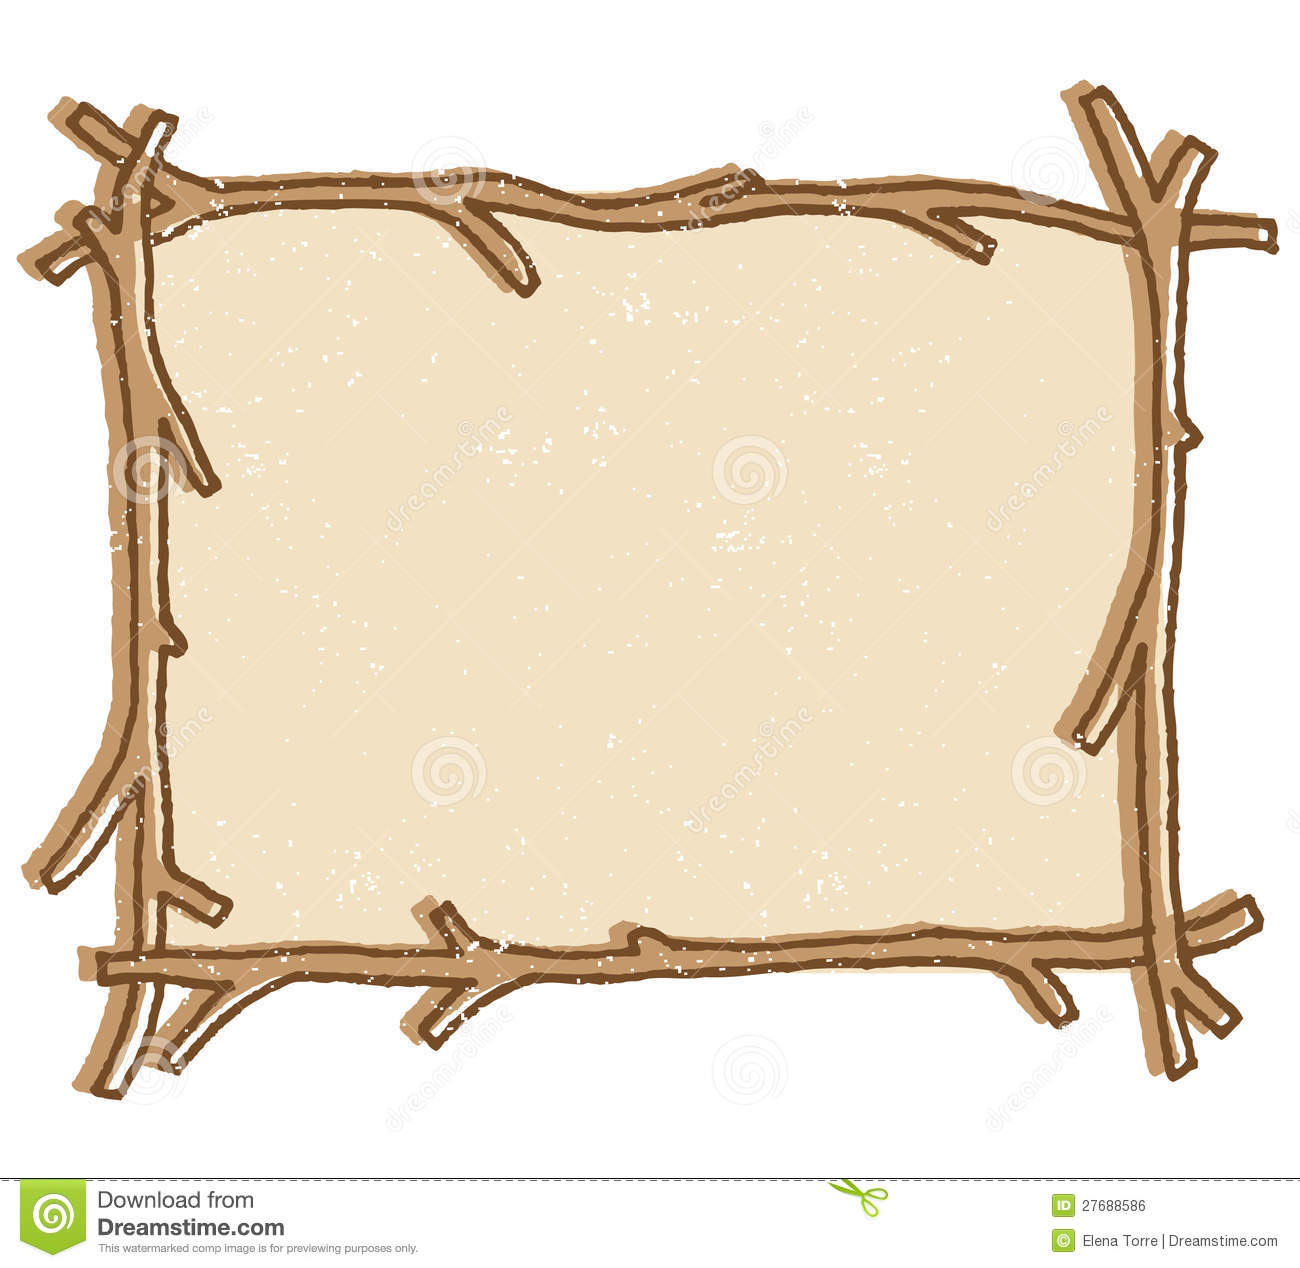 Illustration Of A Twig Stick Frame Isolated On A White Background